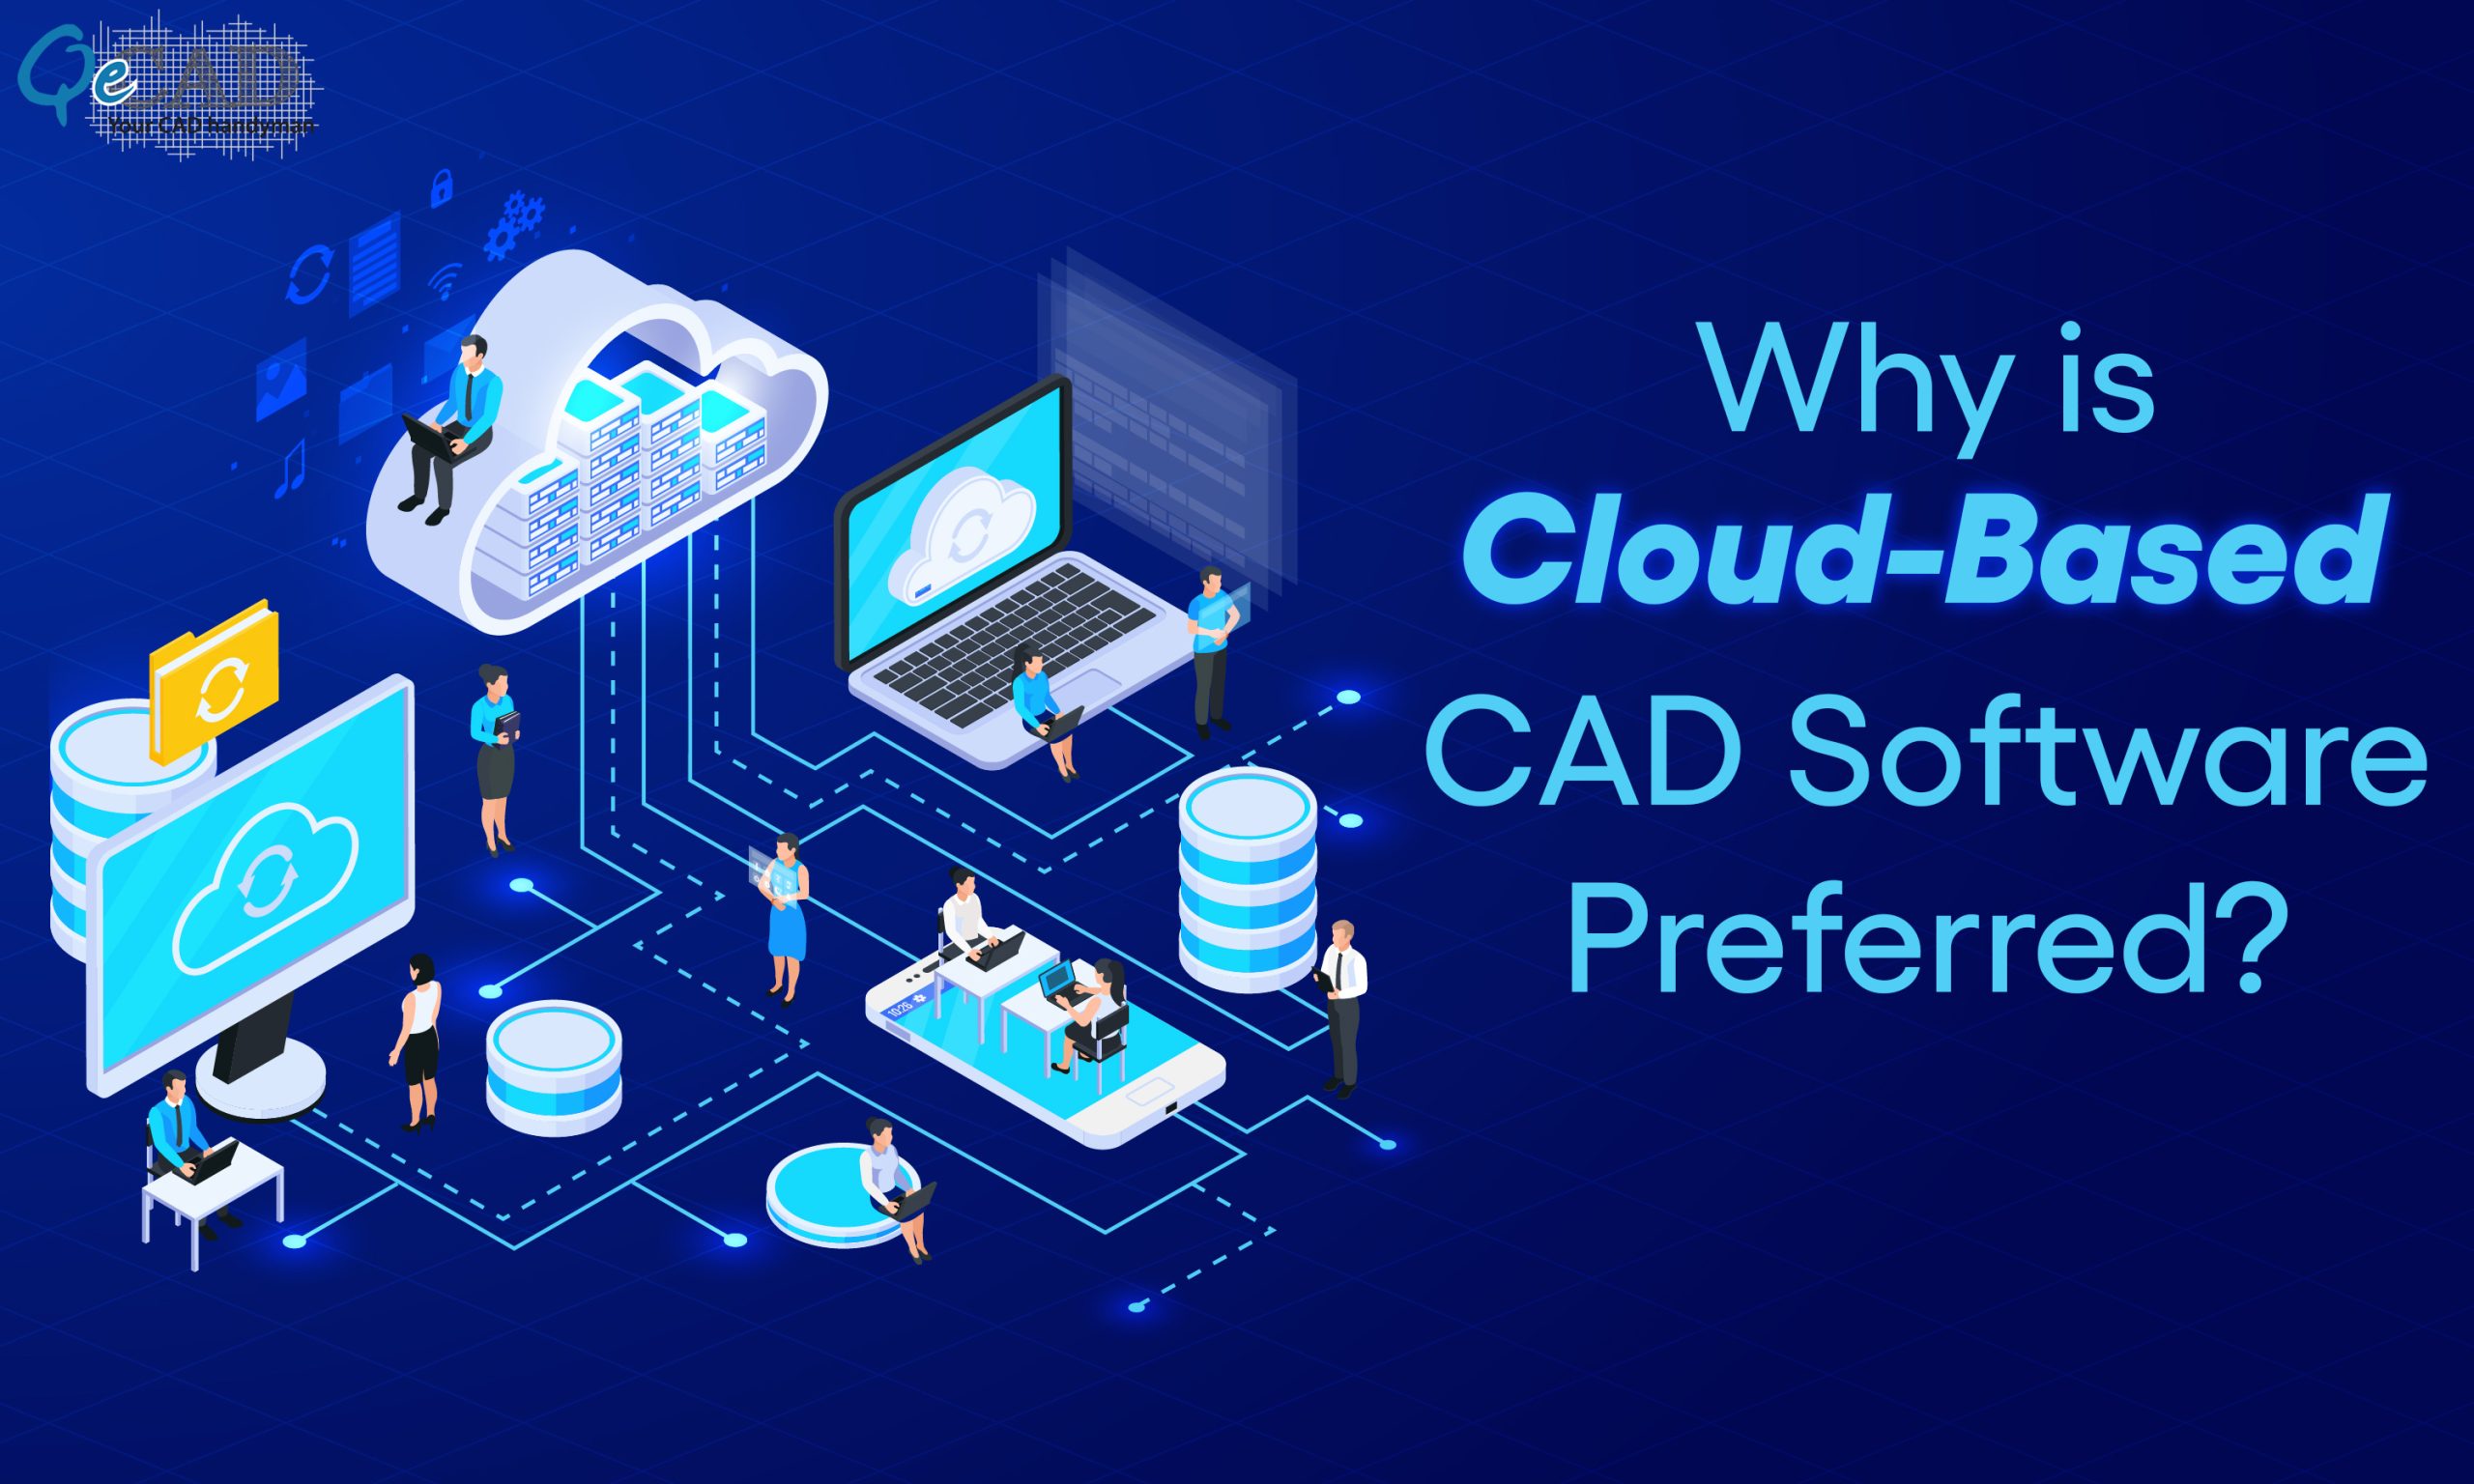 Why is Cloud-Based CAD Software Preferred?